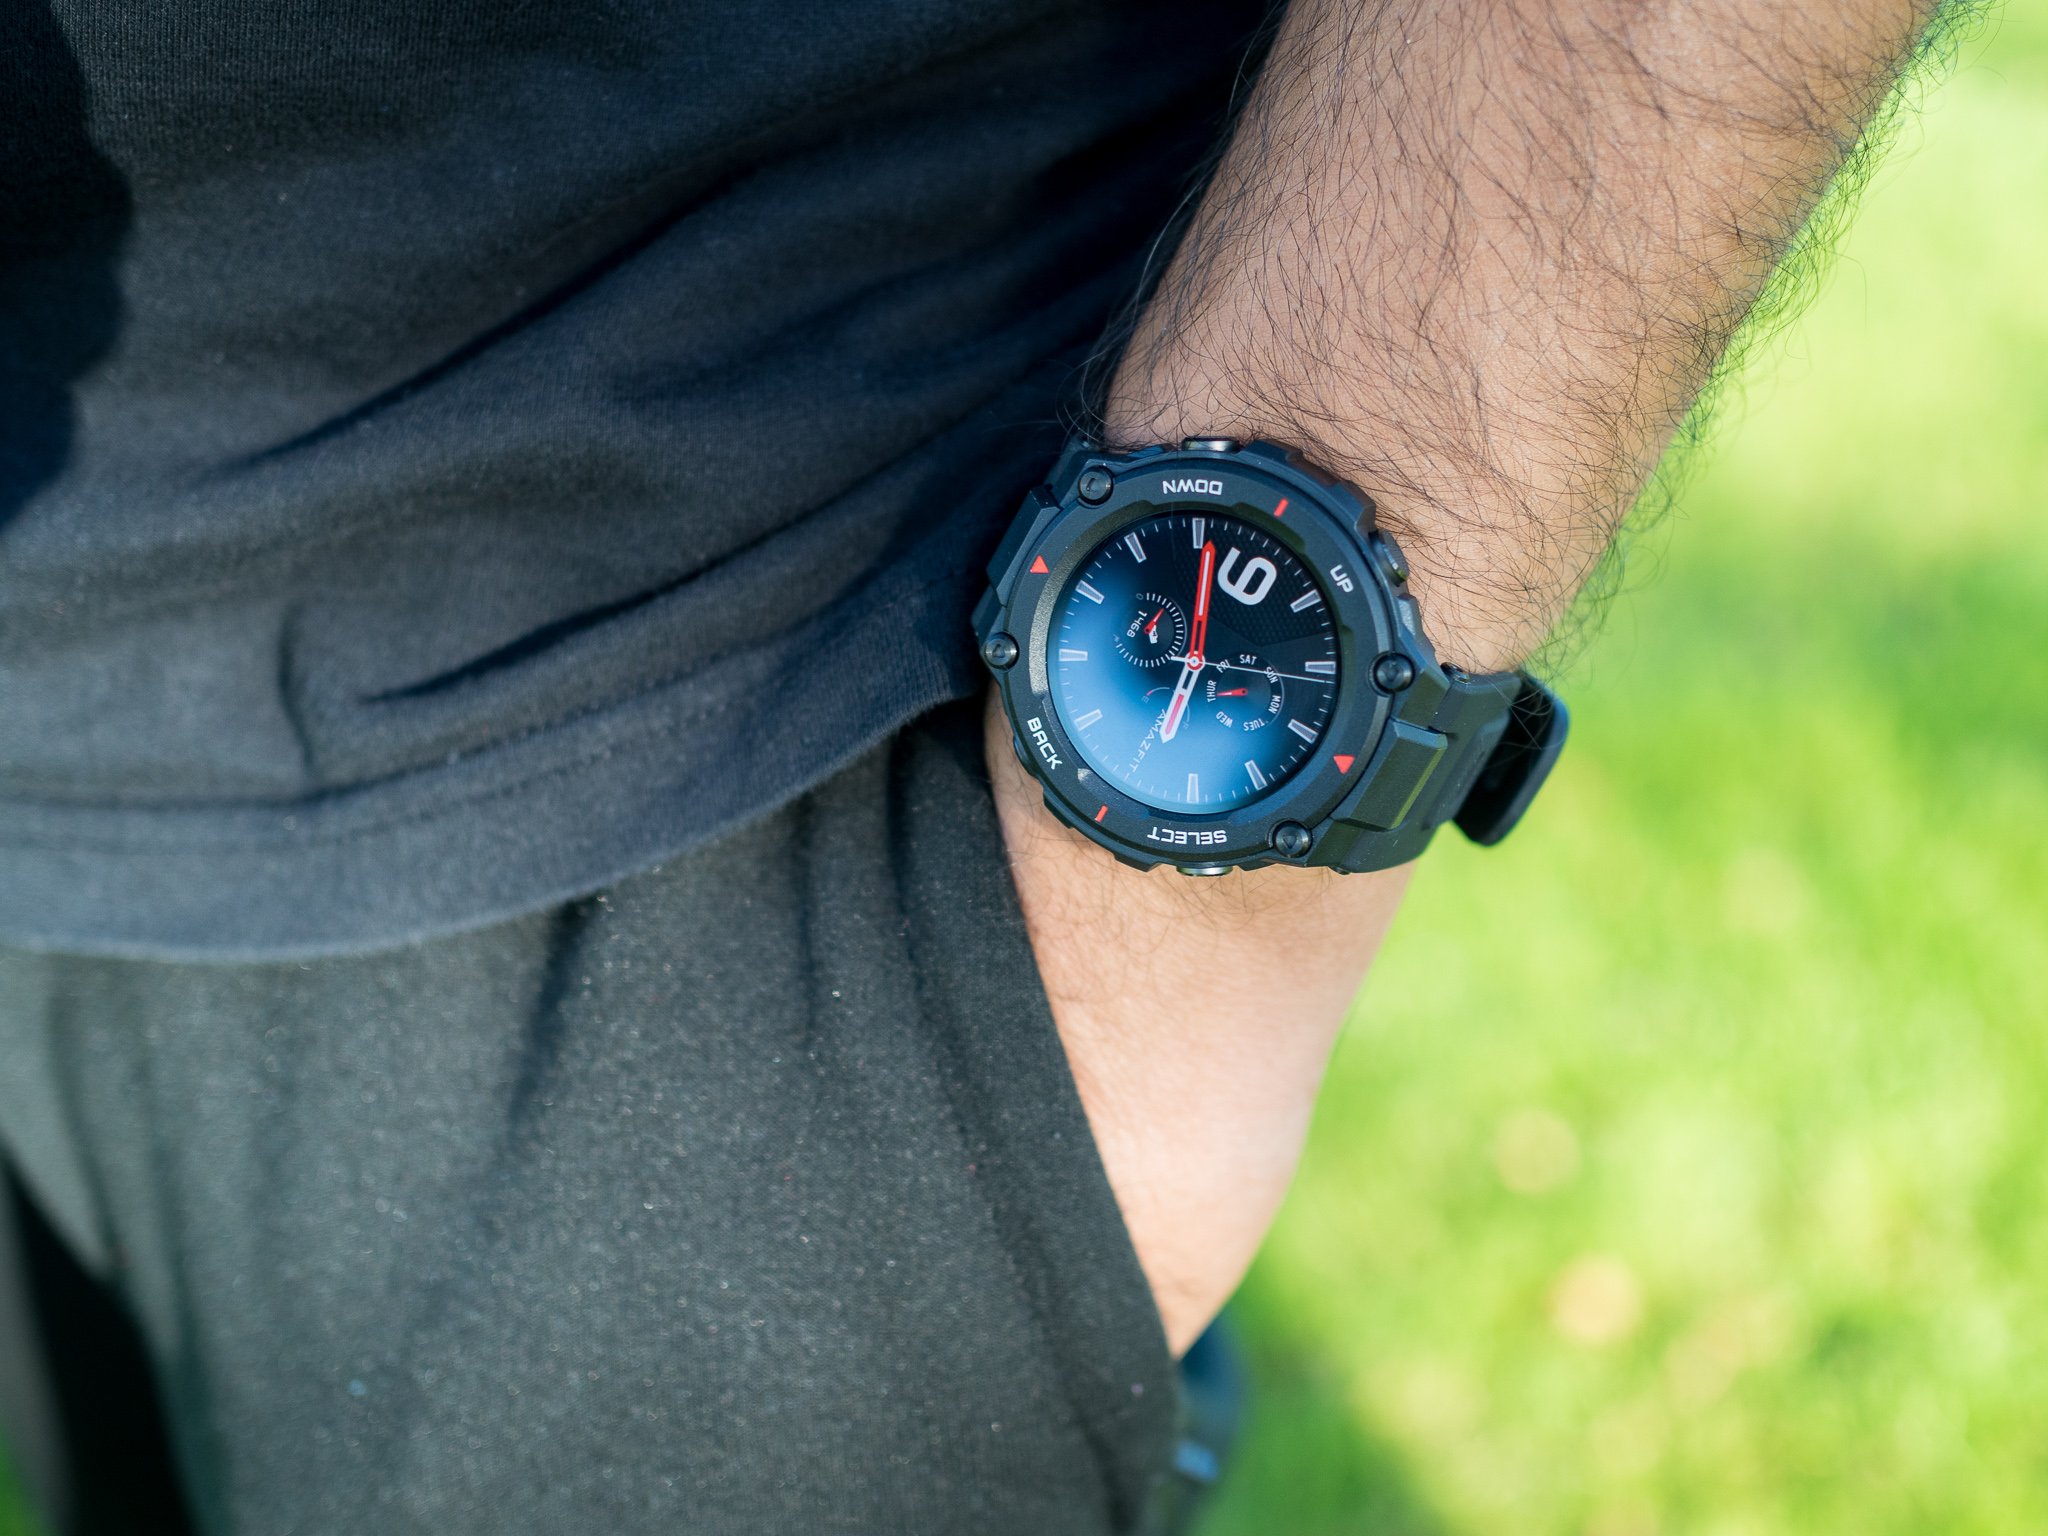 Amazfit T-rex Pro review: a basic, budget outdoor watch that could